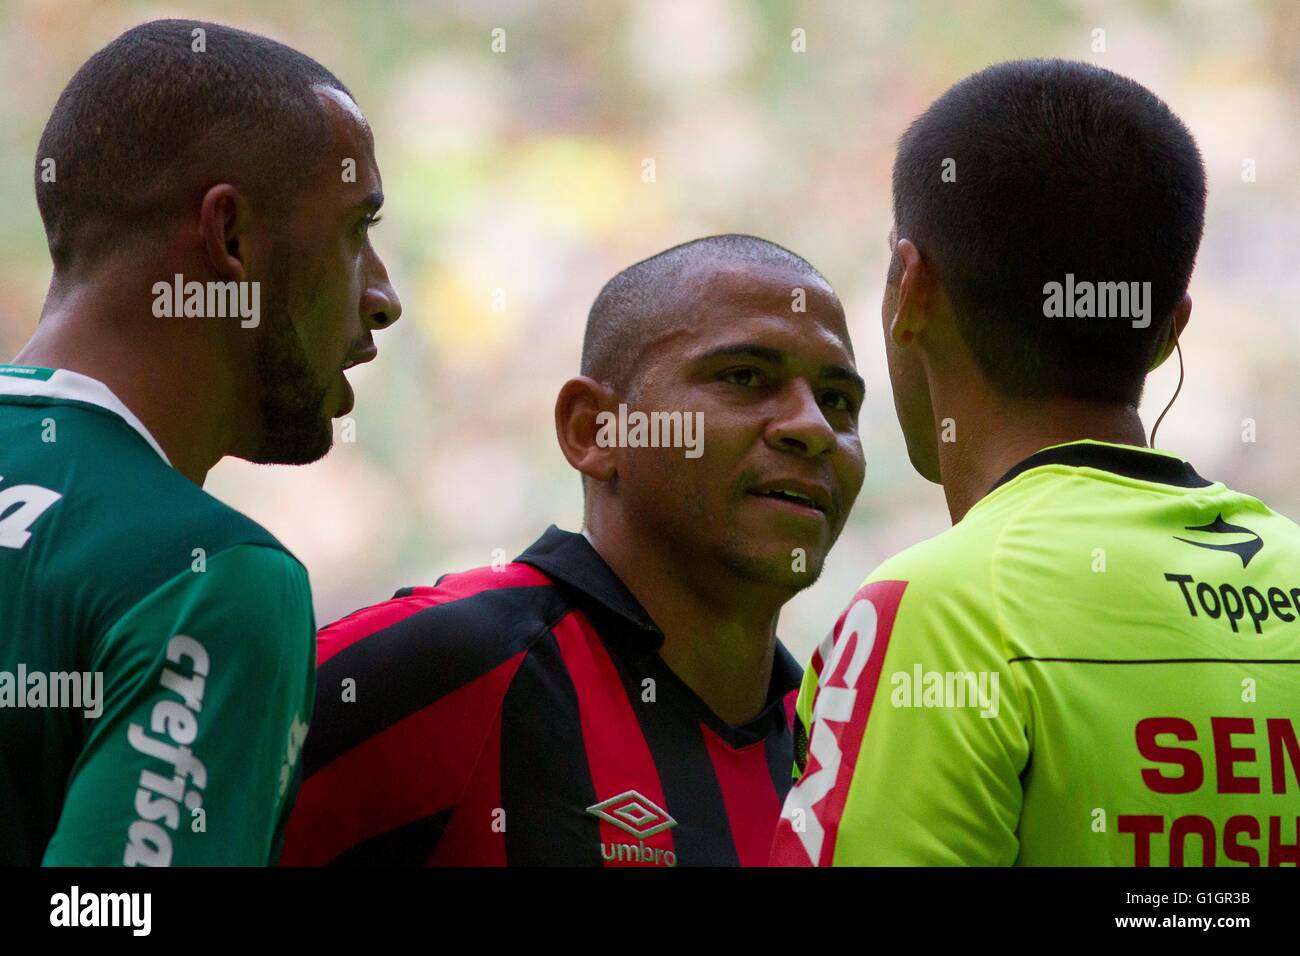 SAO PAULO, Brazil - 14/05/2016: PALM X ATHLETIC PR - Vitor Hugo and Walter talk to the referee during the match between Palmeiras vs Atletico PR, valid for Brasileir?o 2016 held at Allianz Park. (Photo: Marco Galv?o / FotoArena) Stock Photo